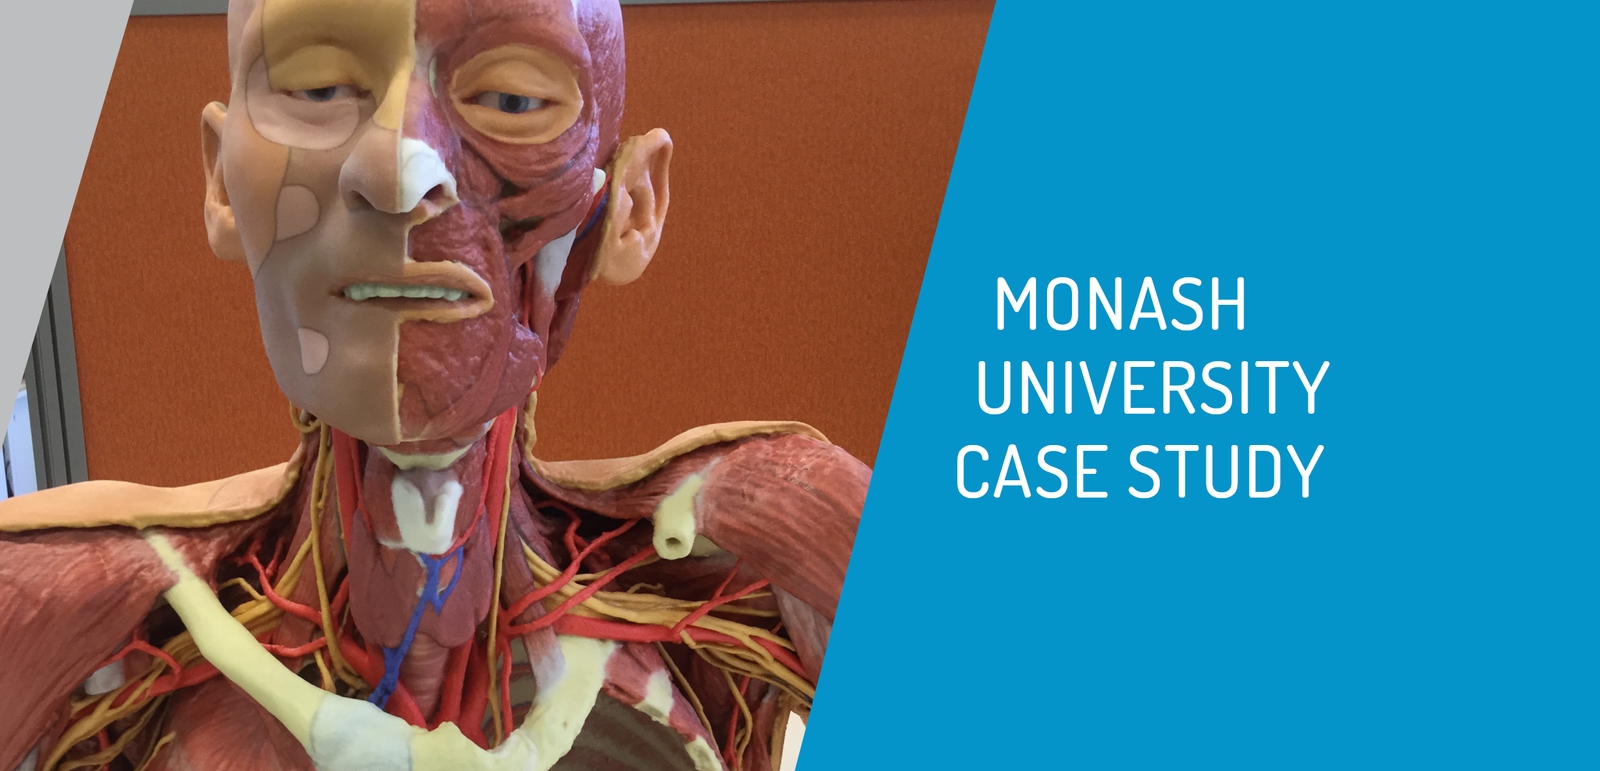 Monash Uni invest in new 3D printing technology to develop alternative teaching aids  